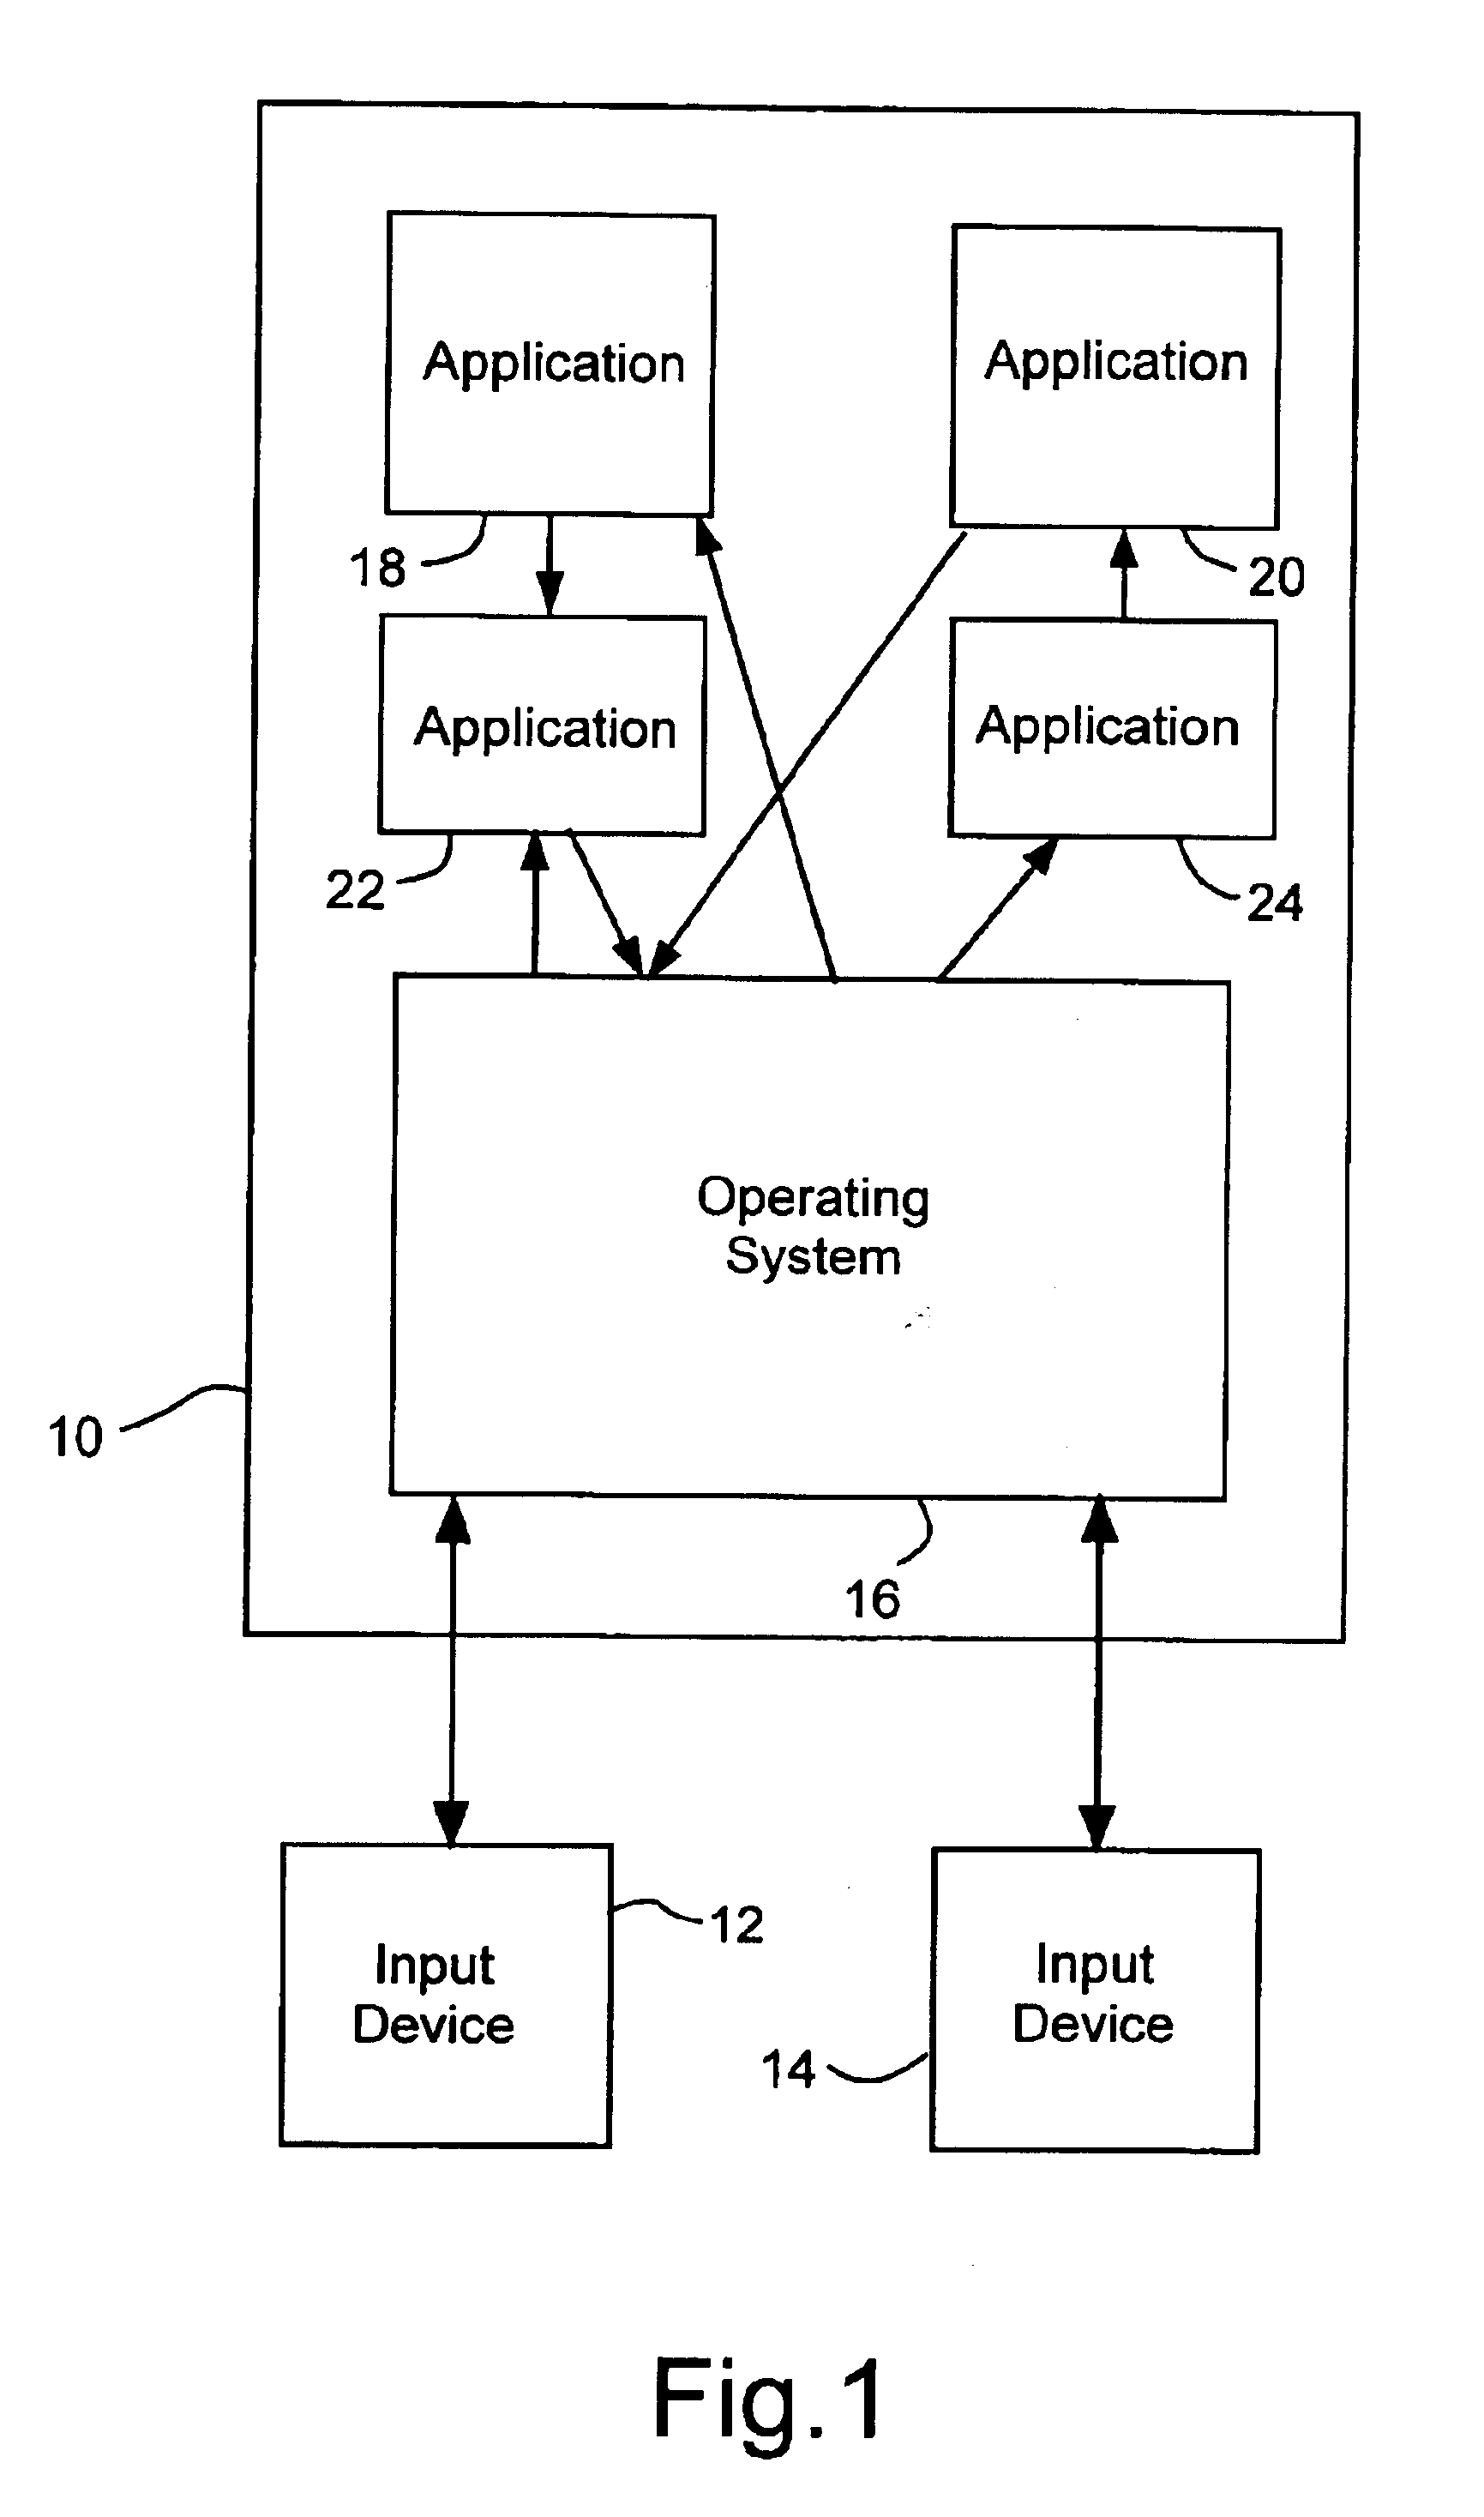 Configurable operating system for control of a mobile I/O device